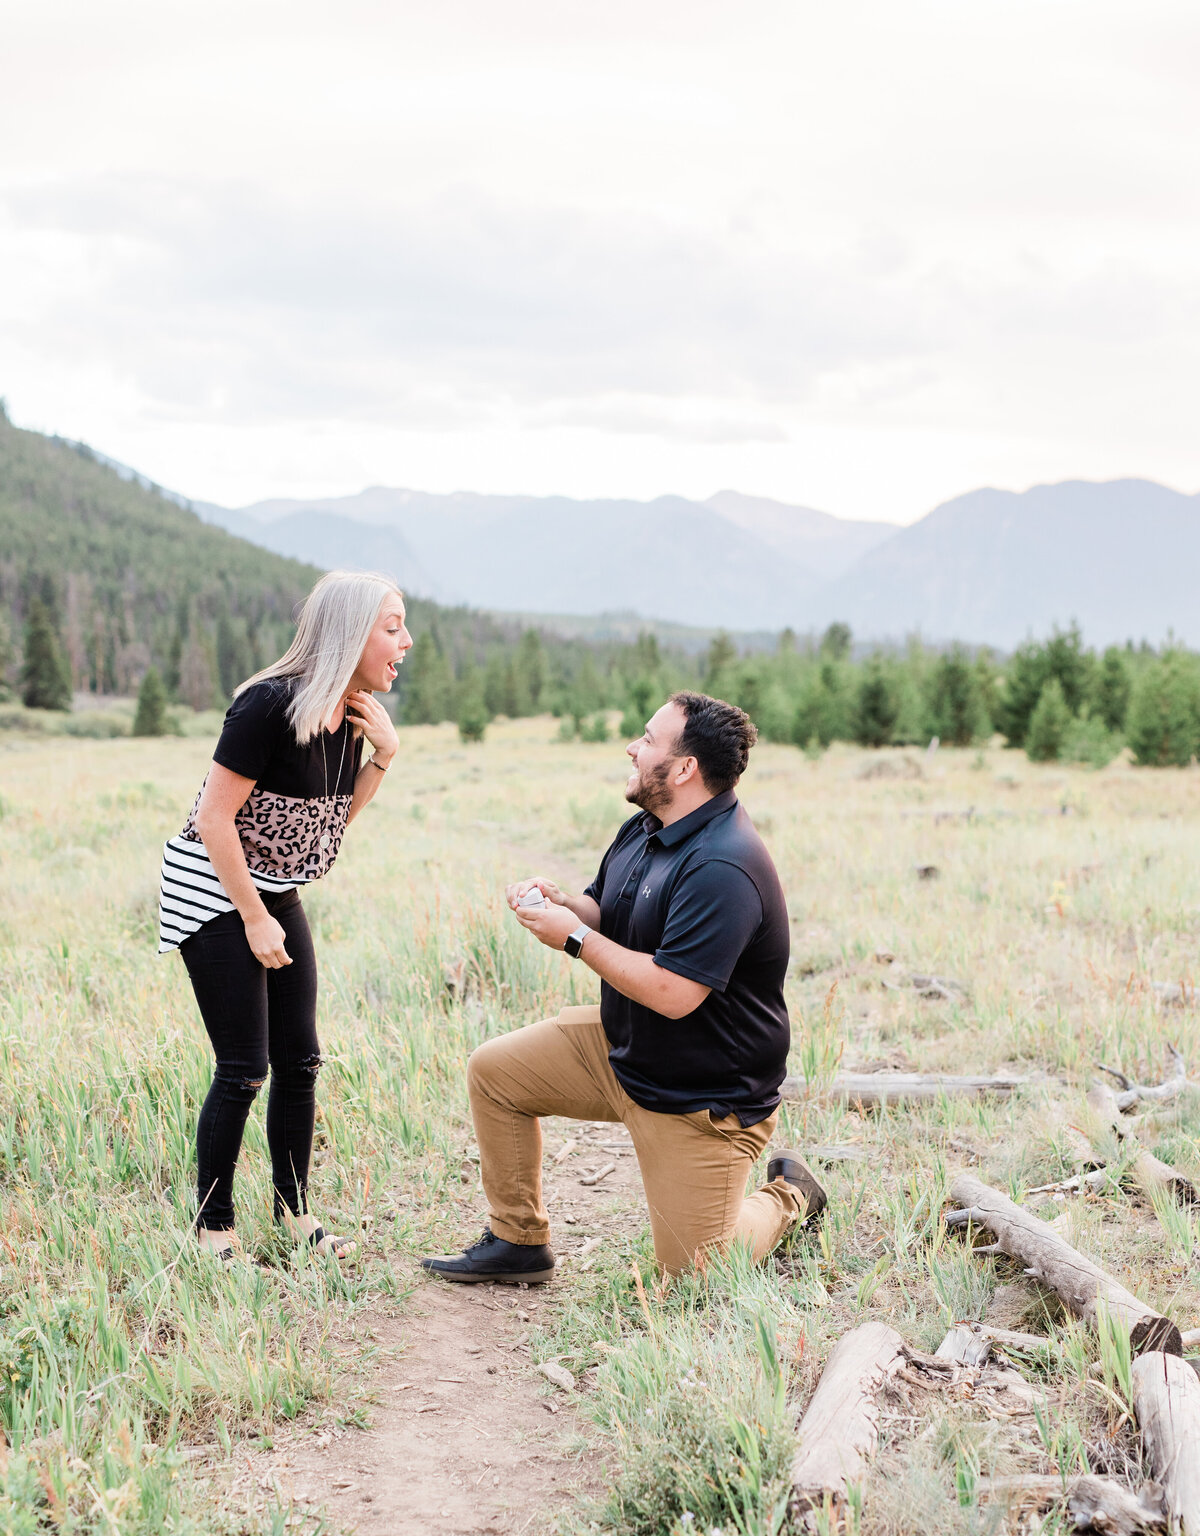 A man is down on one knee proposing to his girlfriend. It is summer and they are in a large mountain meadow